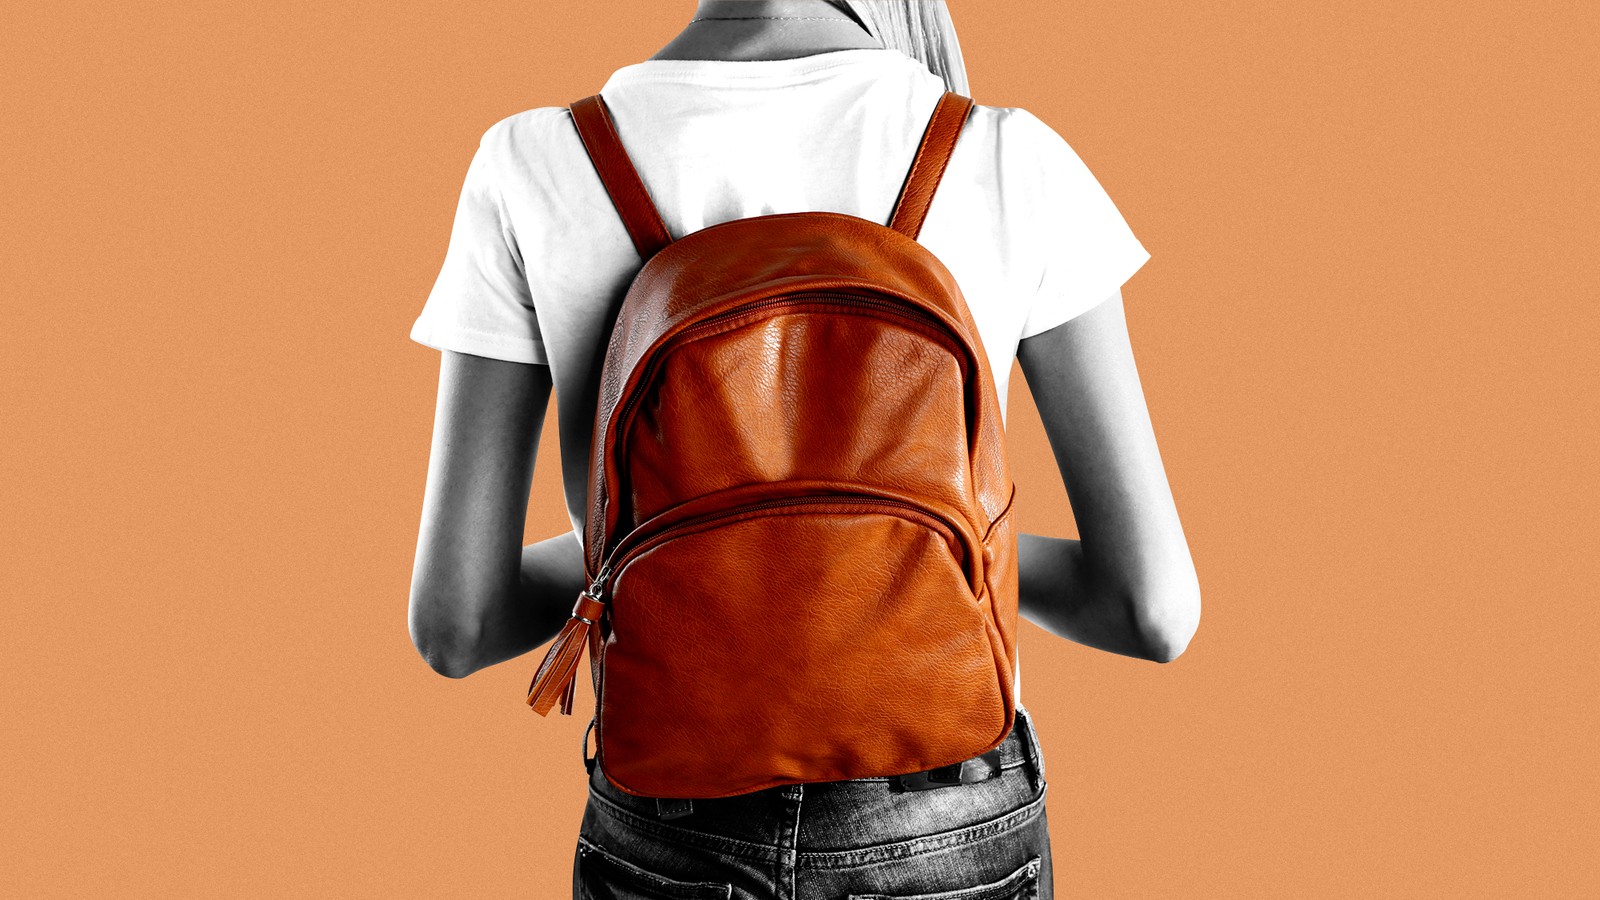 Professional Women Are Using Backpacks Instead of Purses - The